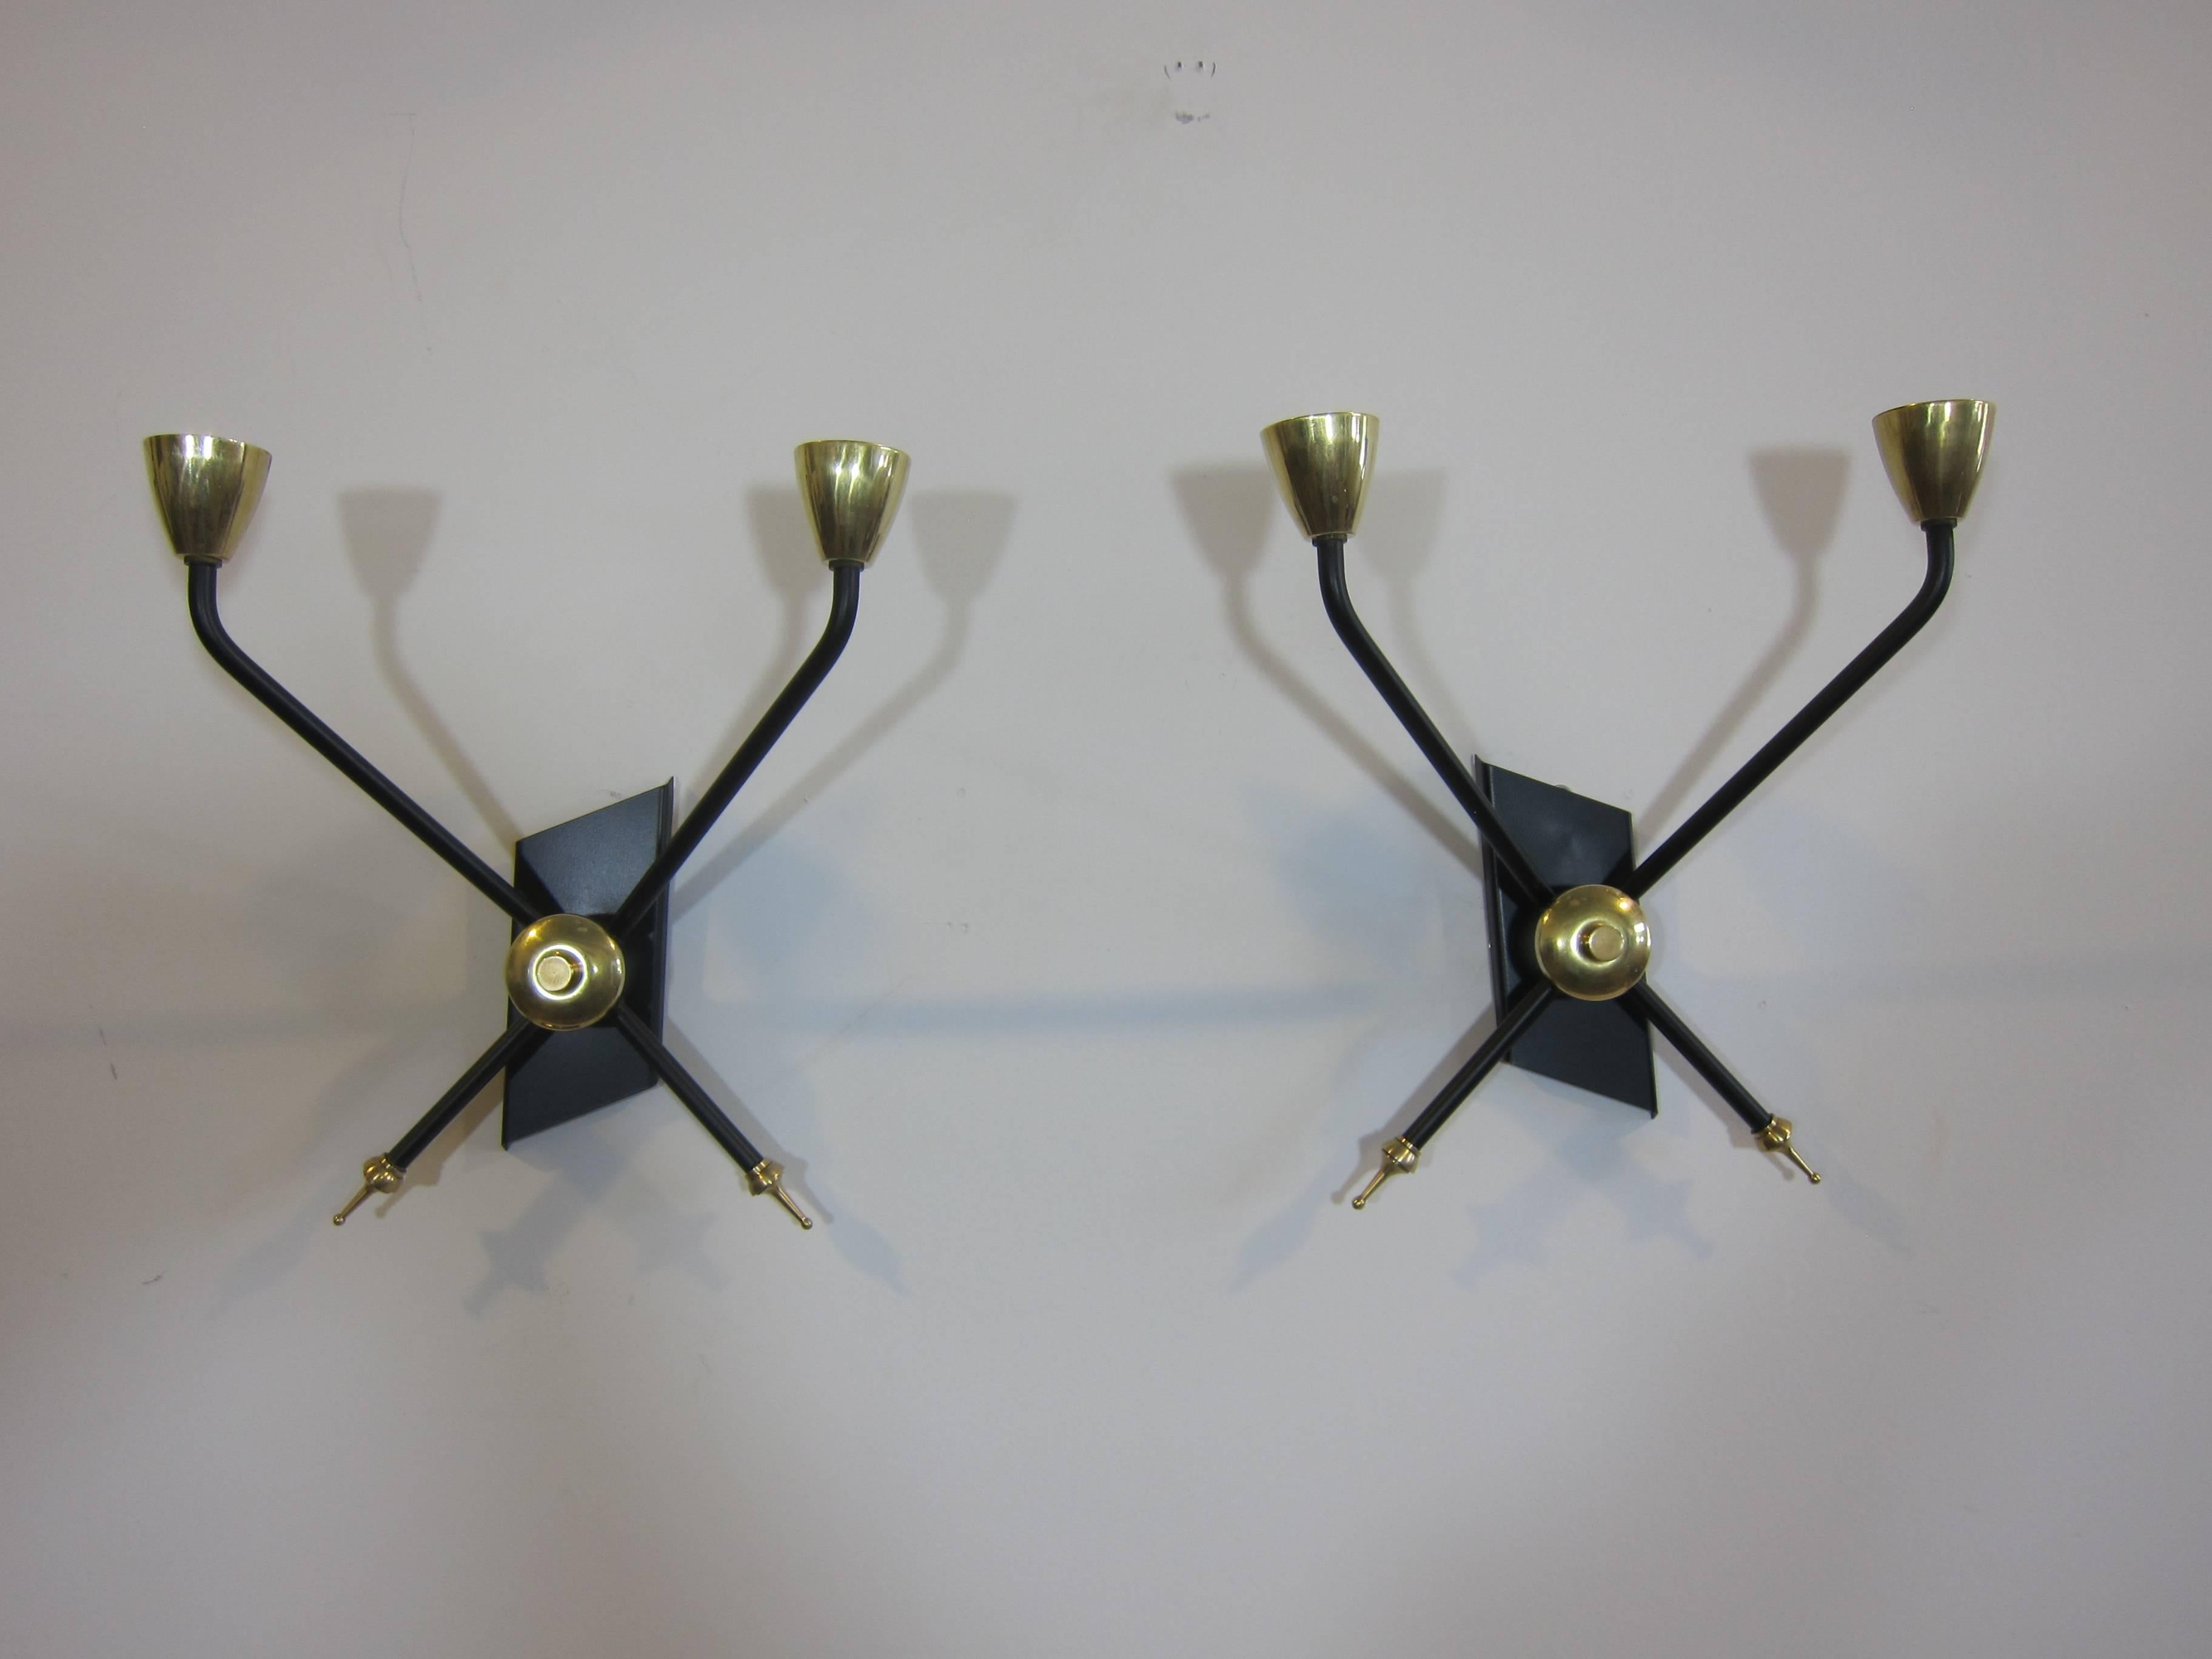 A pair of French Mid-Century sconces attributed to Arlus with directional left and right sided mounting plates. Powder coated iron with brass, France, 1950. Very good to excellent condition.